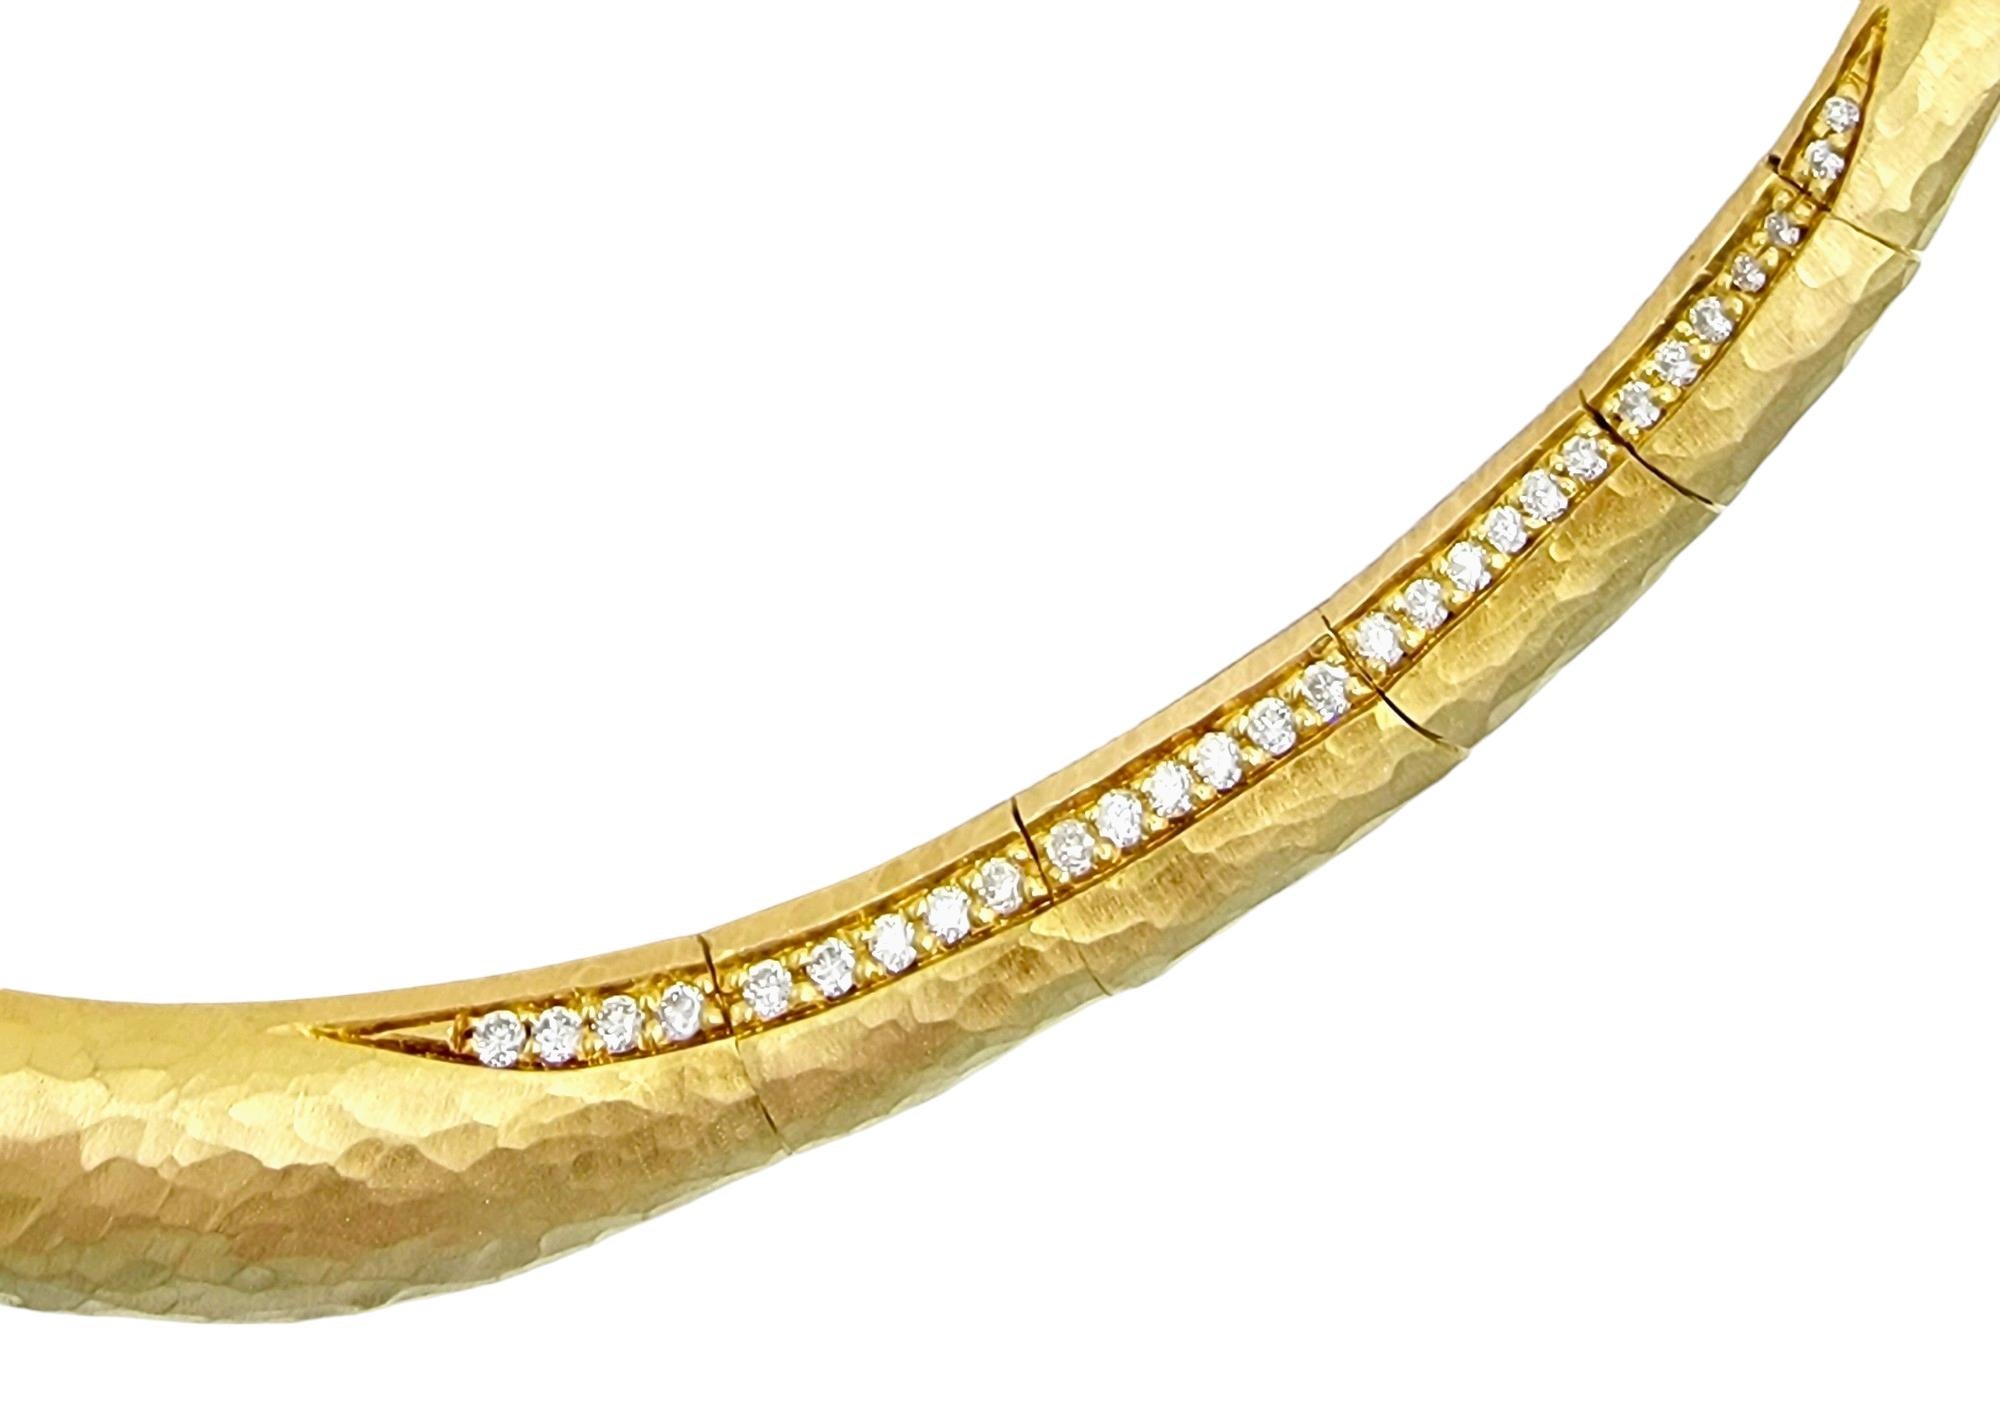 H. Stern Hammered Diamond Collar Link Necklace Set in 18 Karat Yellow Gold In Good Condition For Sale In Scottsdale, AZ